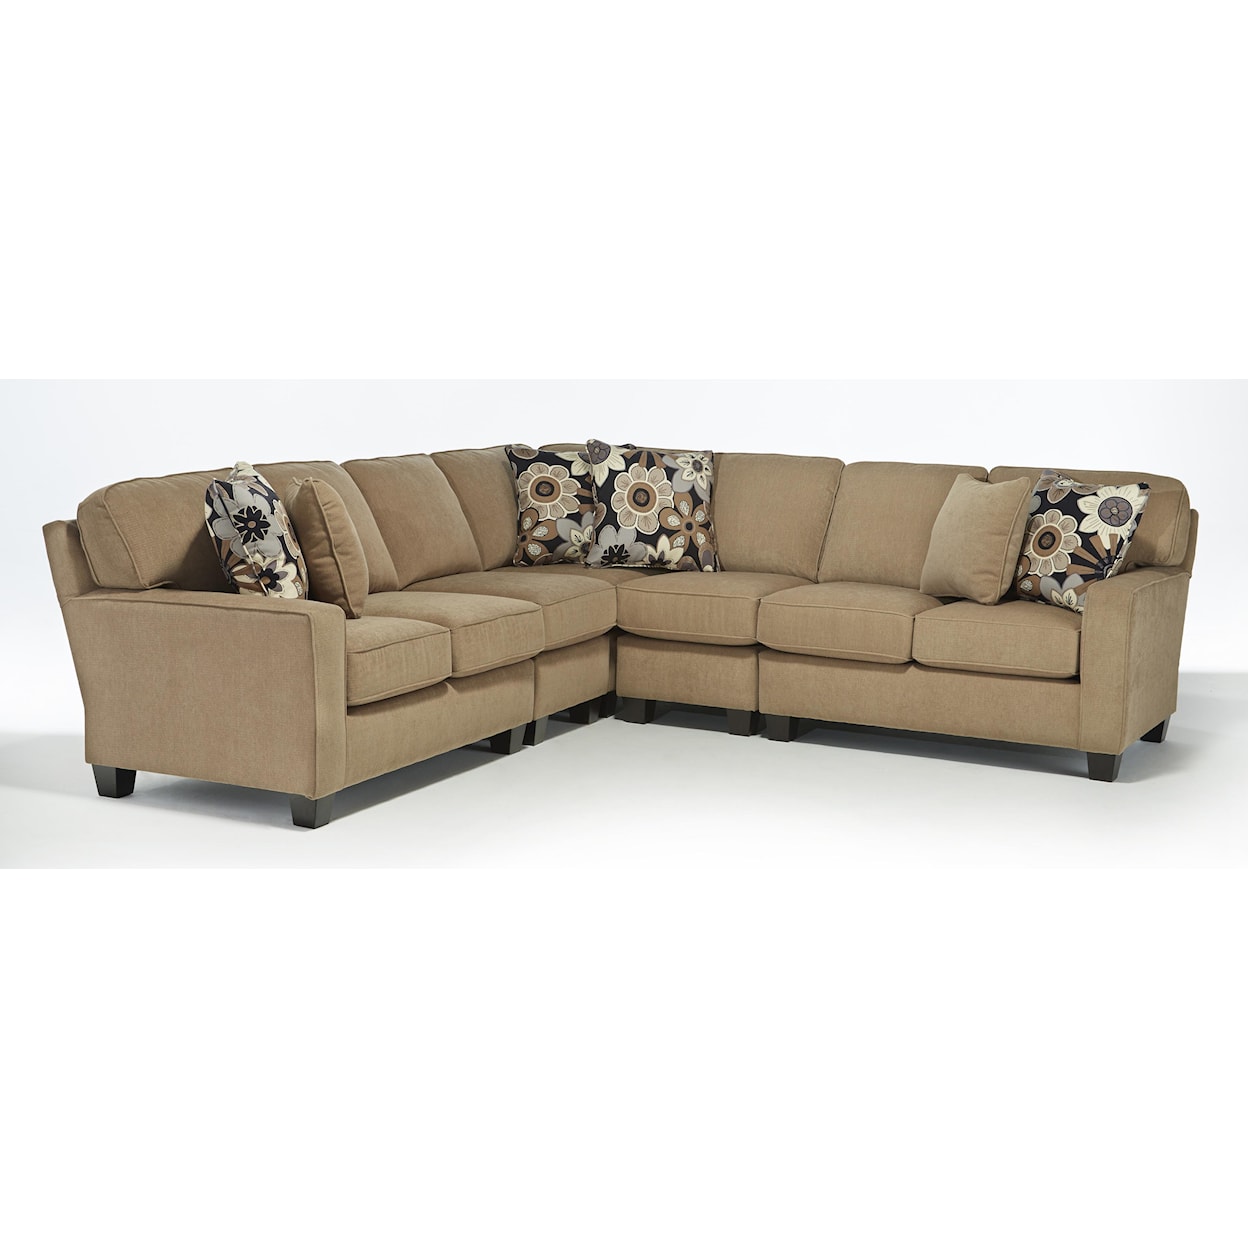 Best Home Furnishings Annabel 5 Pc Sectional Sofa